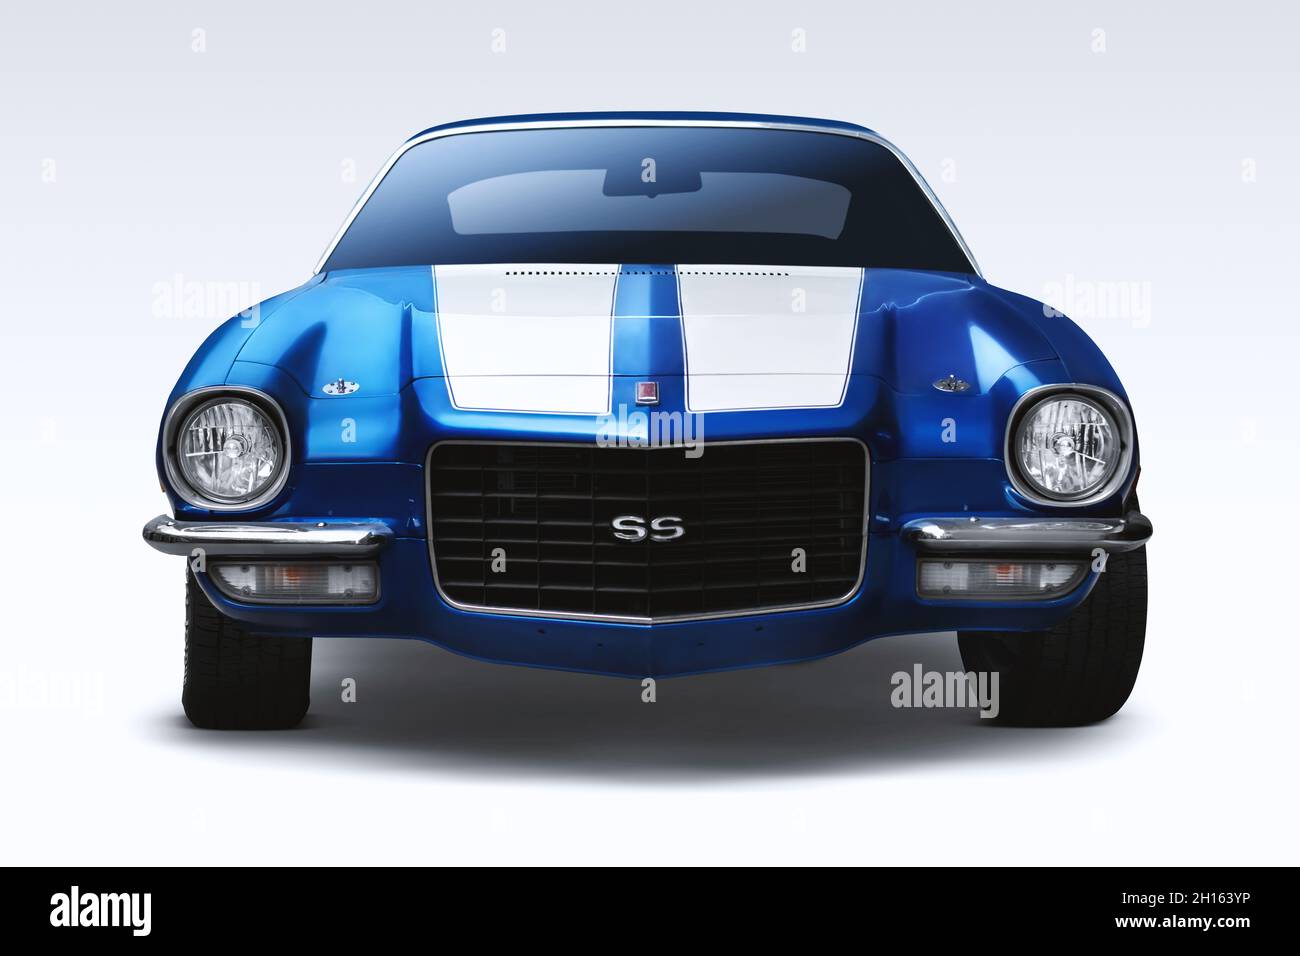 Izmir, Turkey - June 21, 2021: Front view of a Blue colored 1974 Pontiac Brand Trans am firebird in a studio shot on a white background. Stock Photo